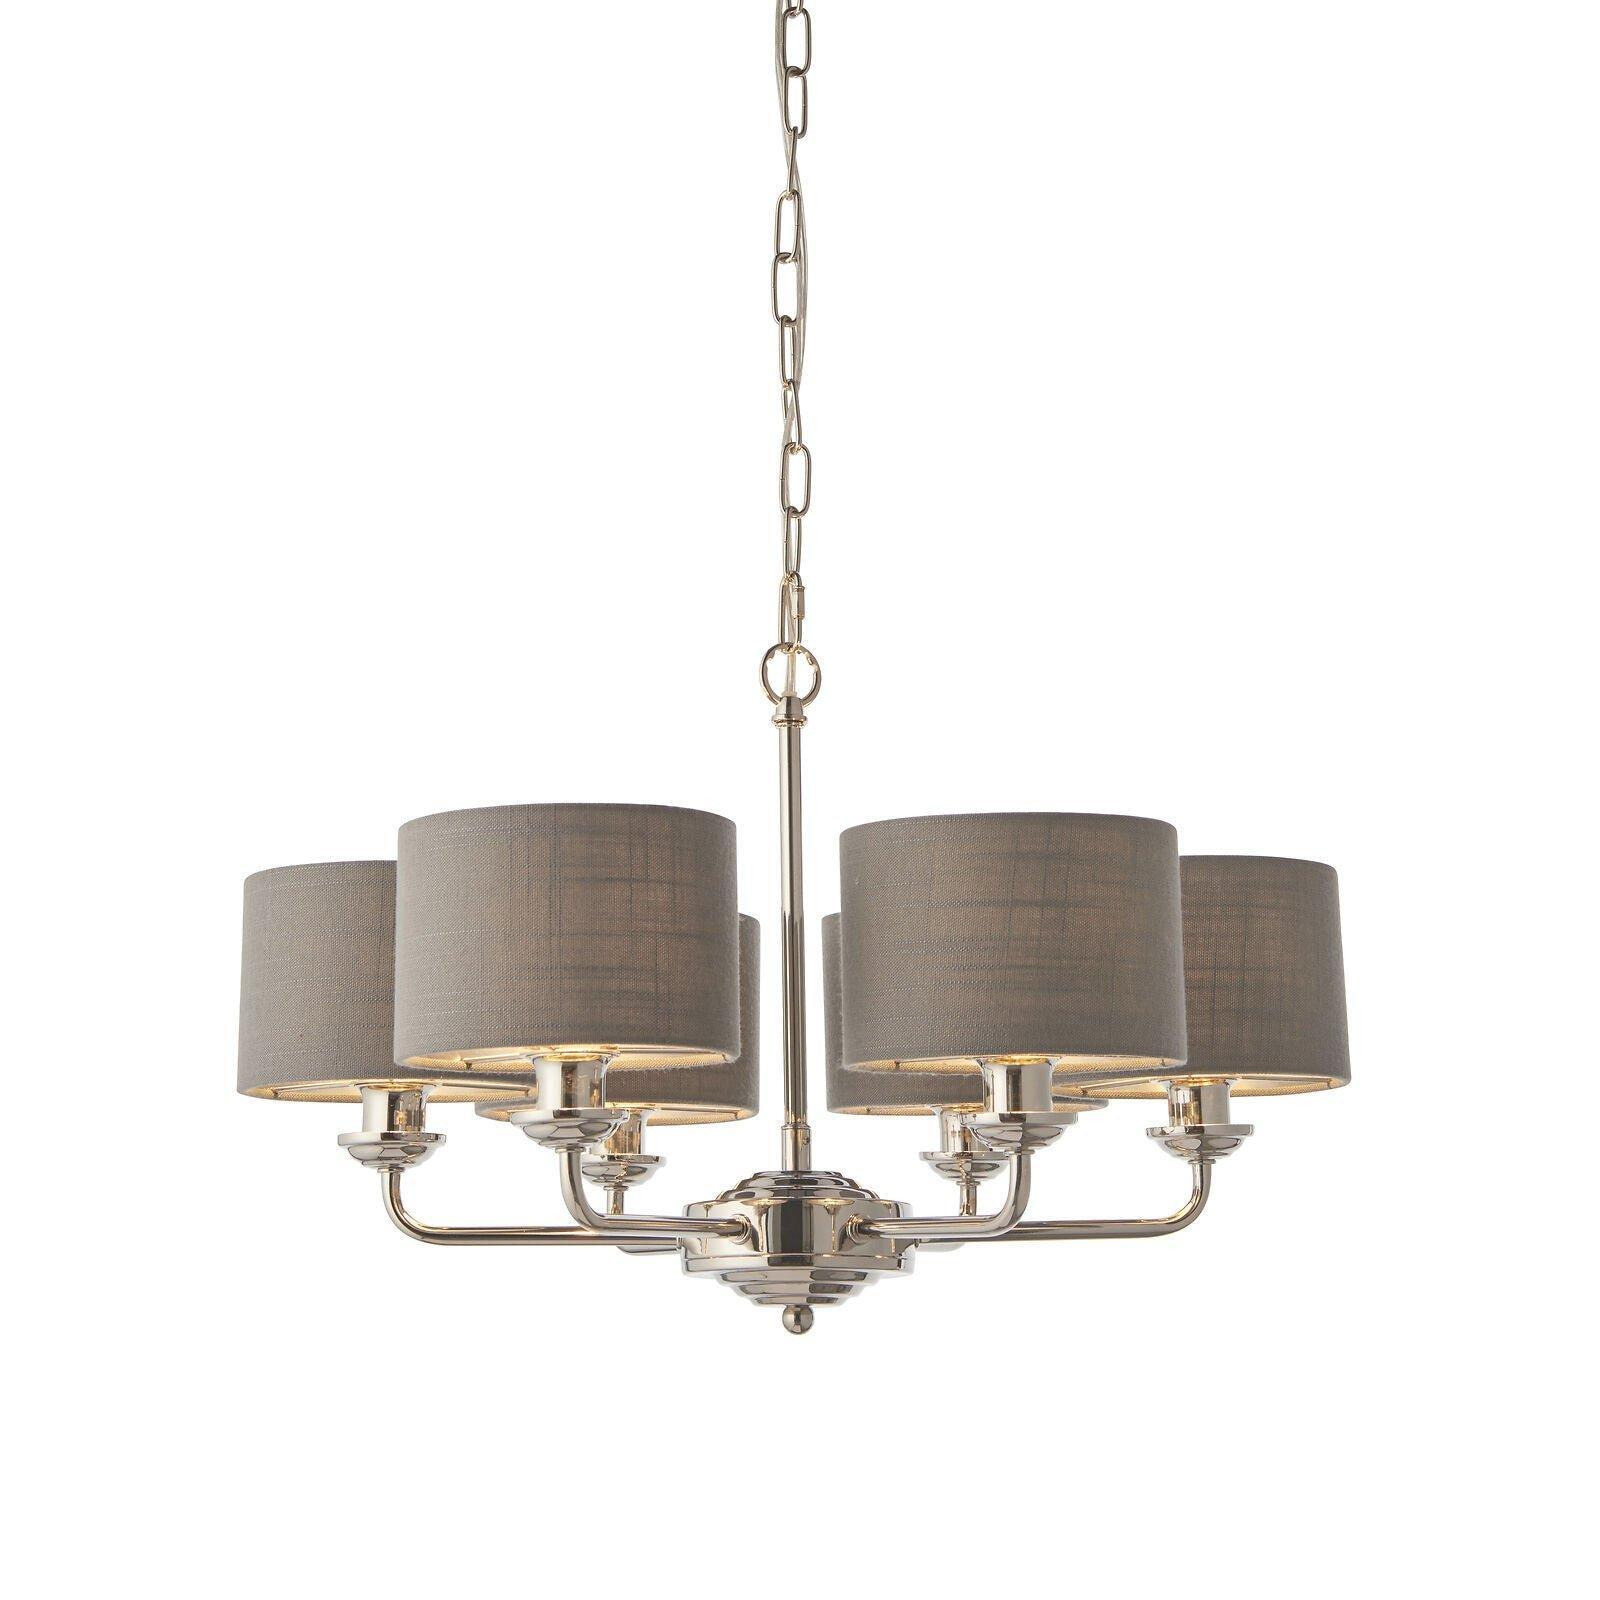 Ceiling Pendant Light - Bright Nickel Plate & Charcoal Fabric - 6 x 28W E14 - image 1